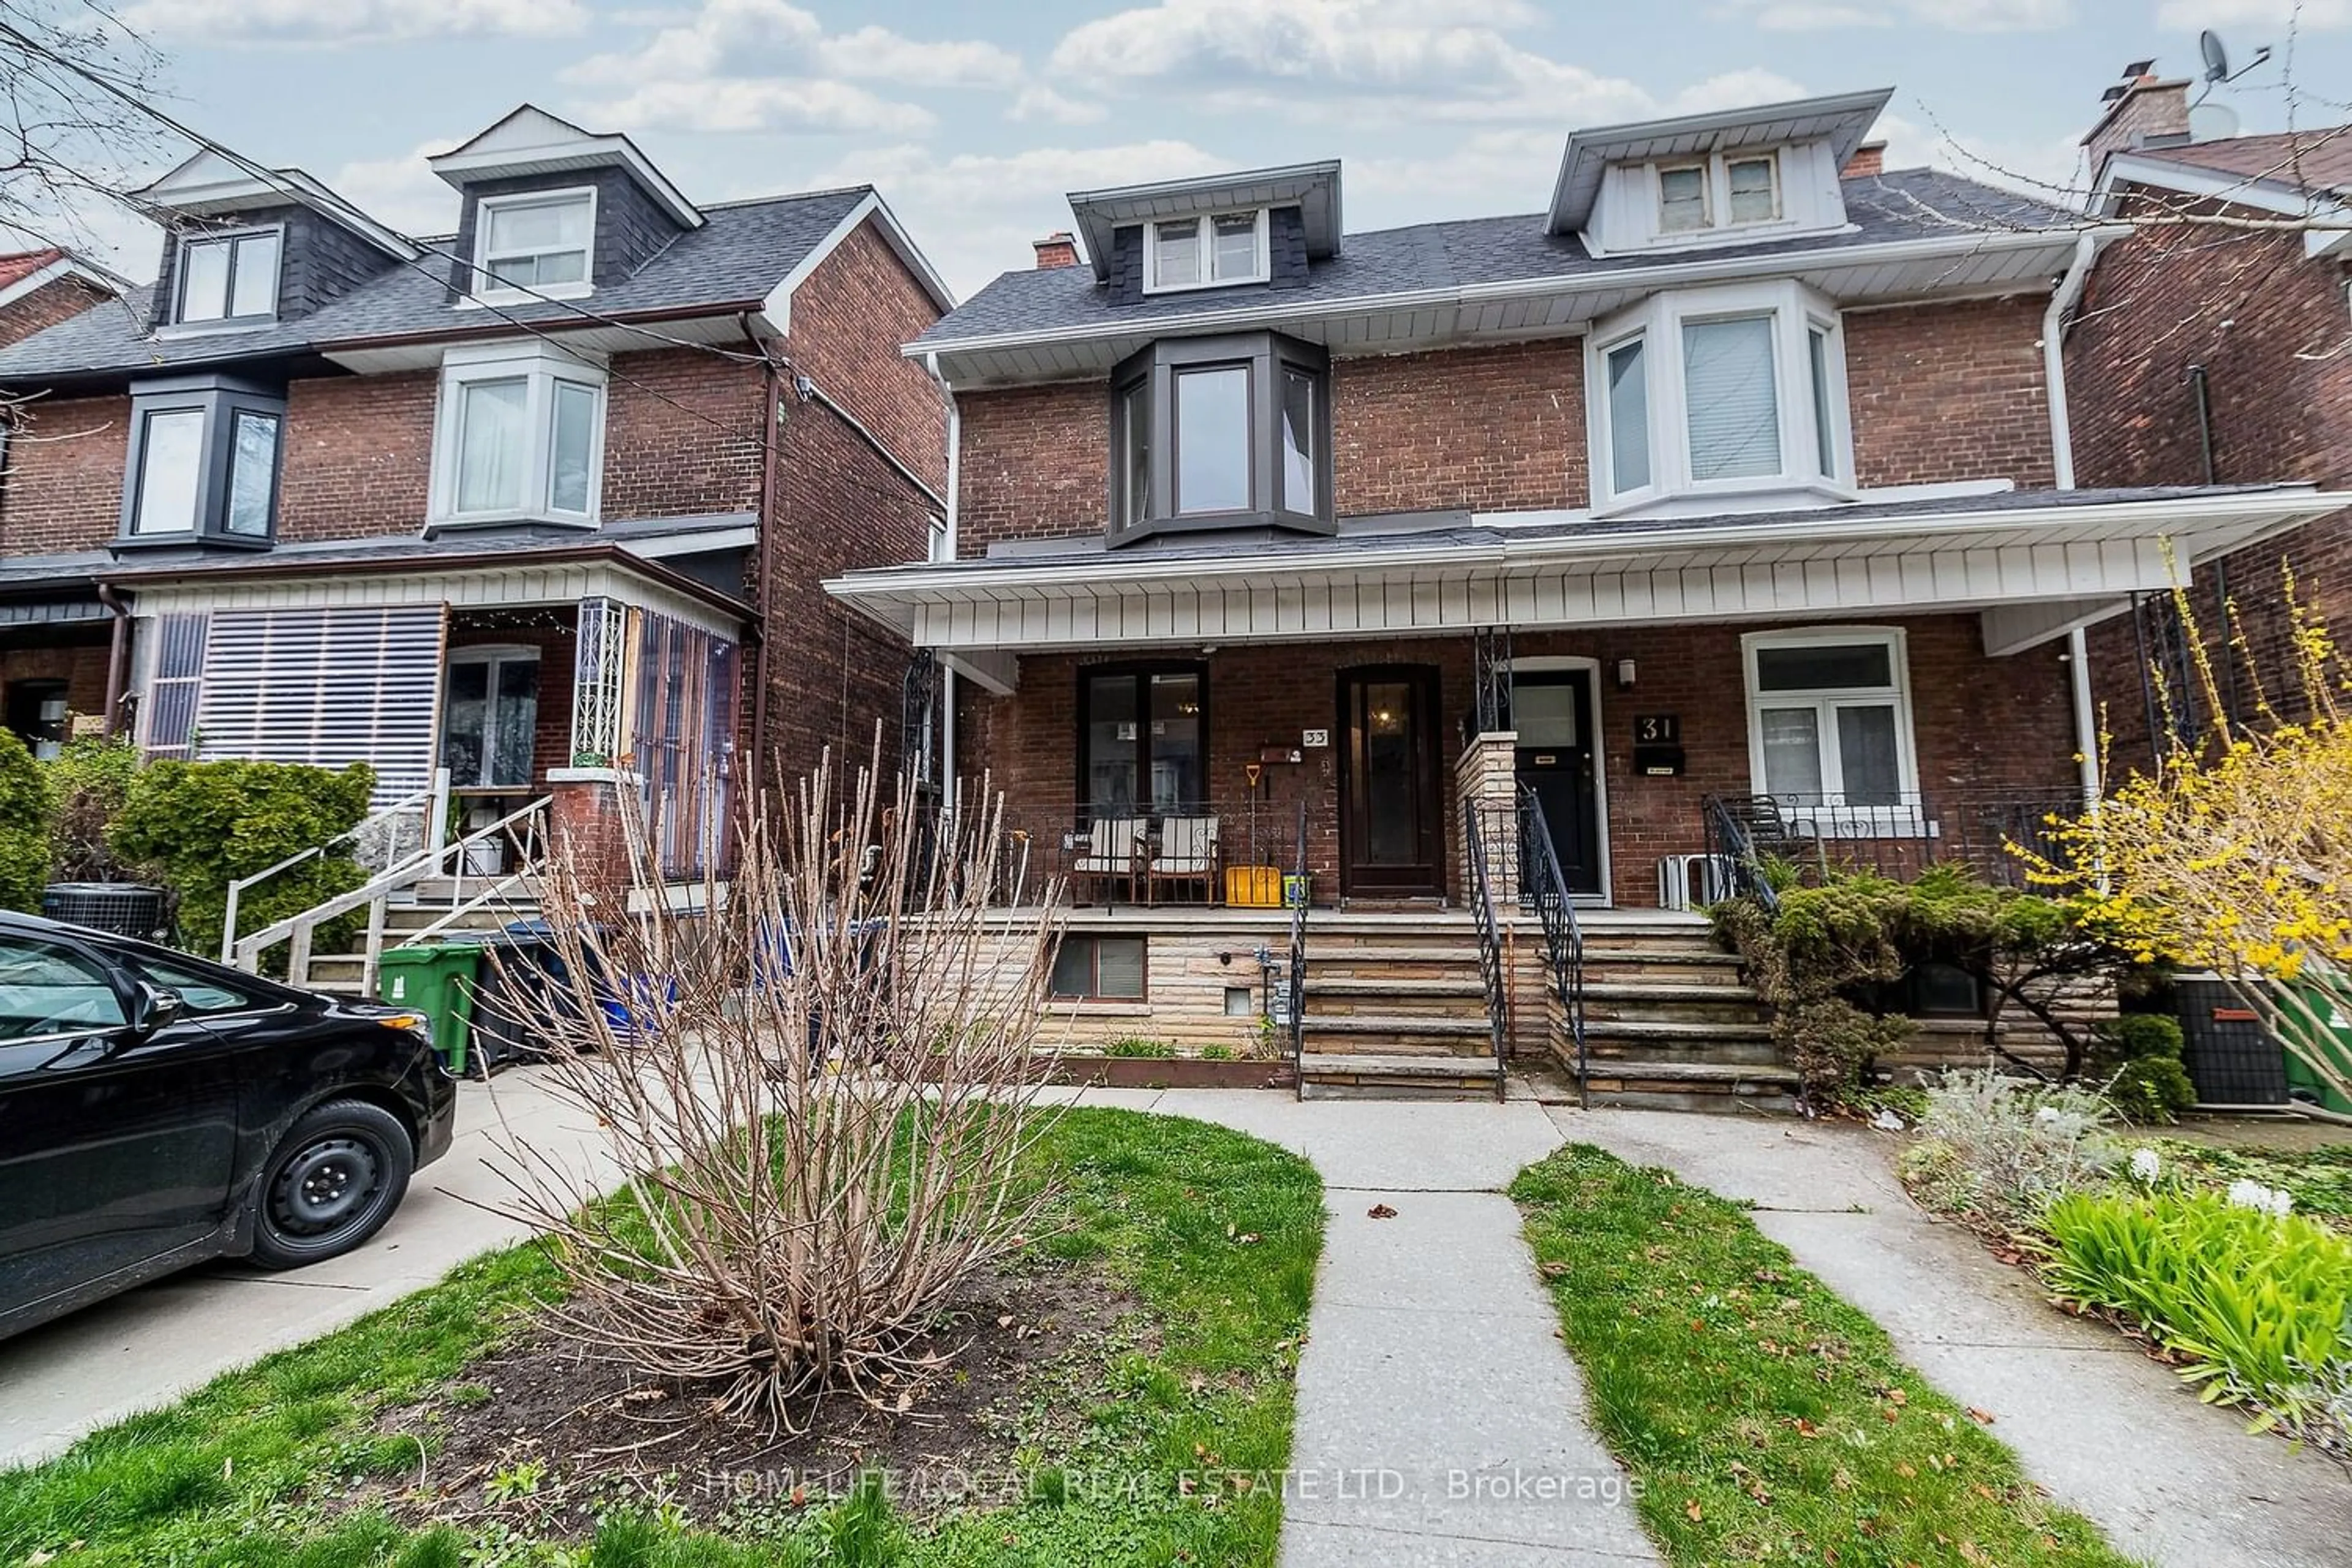 Home with brick exterior material for 33 Pauline Ave, Toronto Ontario M6H 3M7